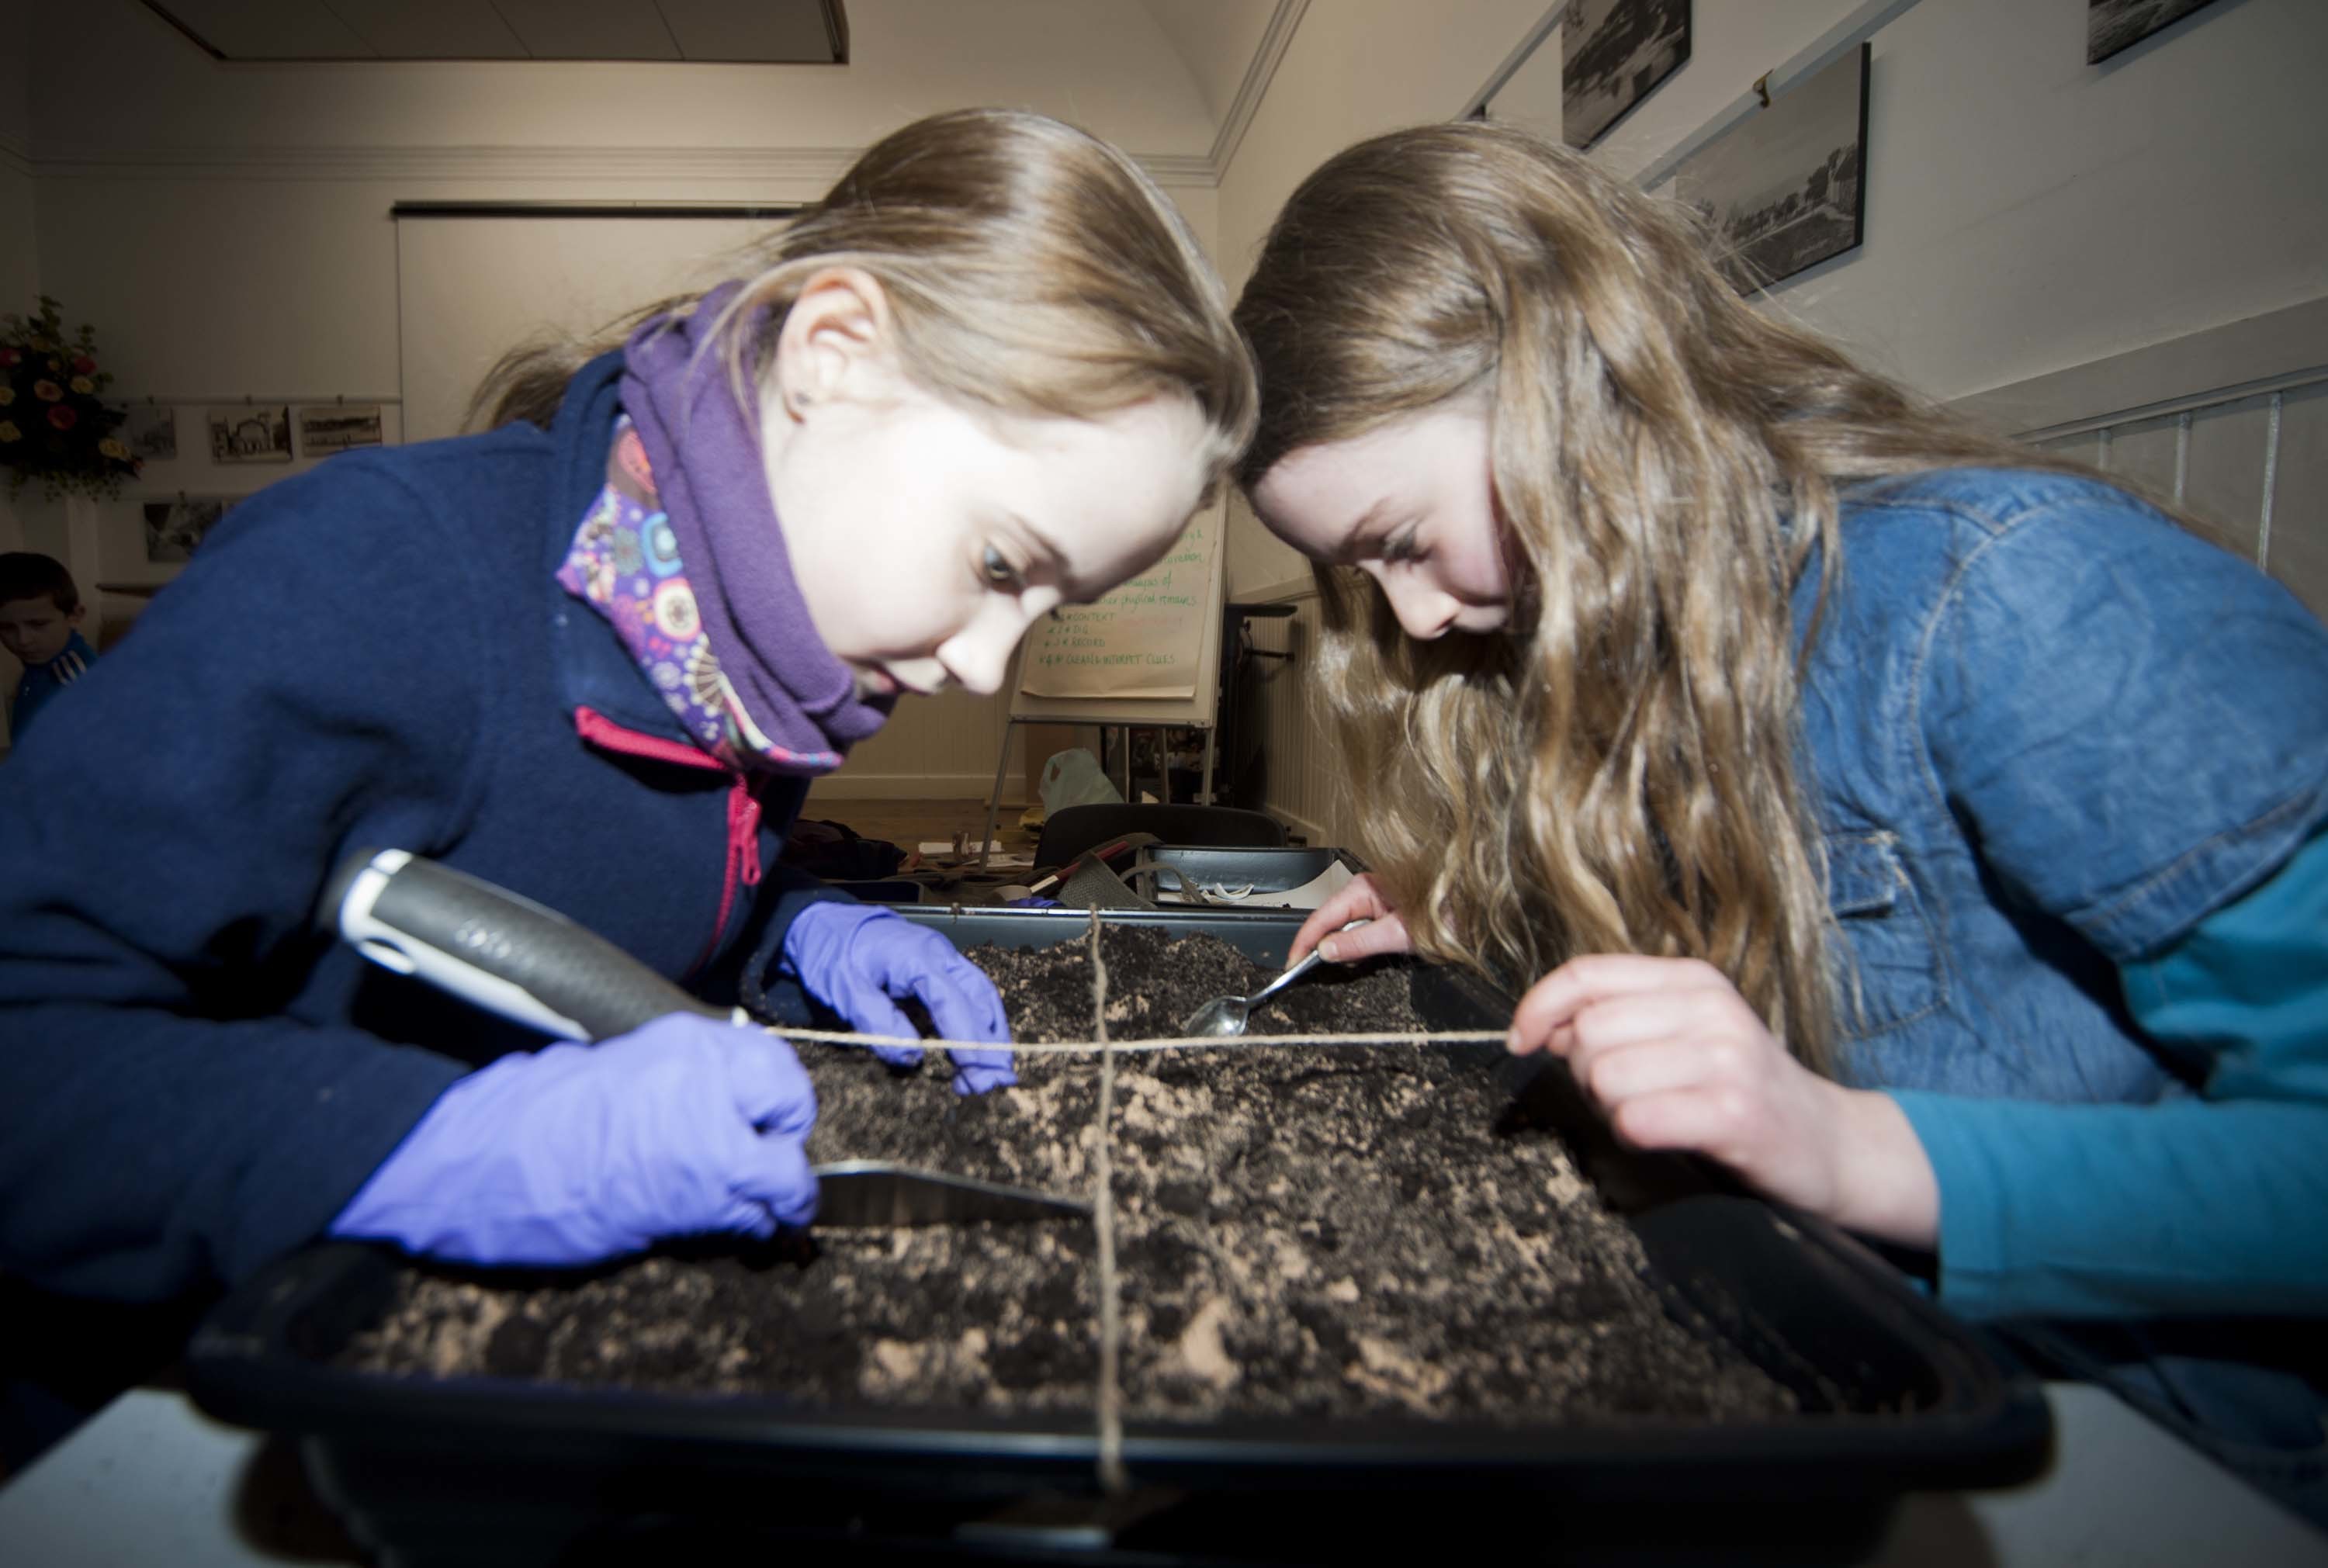 Martha Kenyon-Smith and Violet Irvine investigate what is in their trench. 



Photo by
Michael Traill						
9 South Road
Rhynie
Huntly
AB54 4GA

Contact numbers
Mob	07739 38 4792
Home	01464 861425